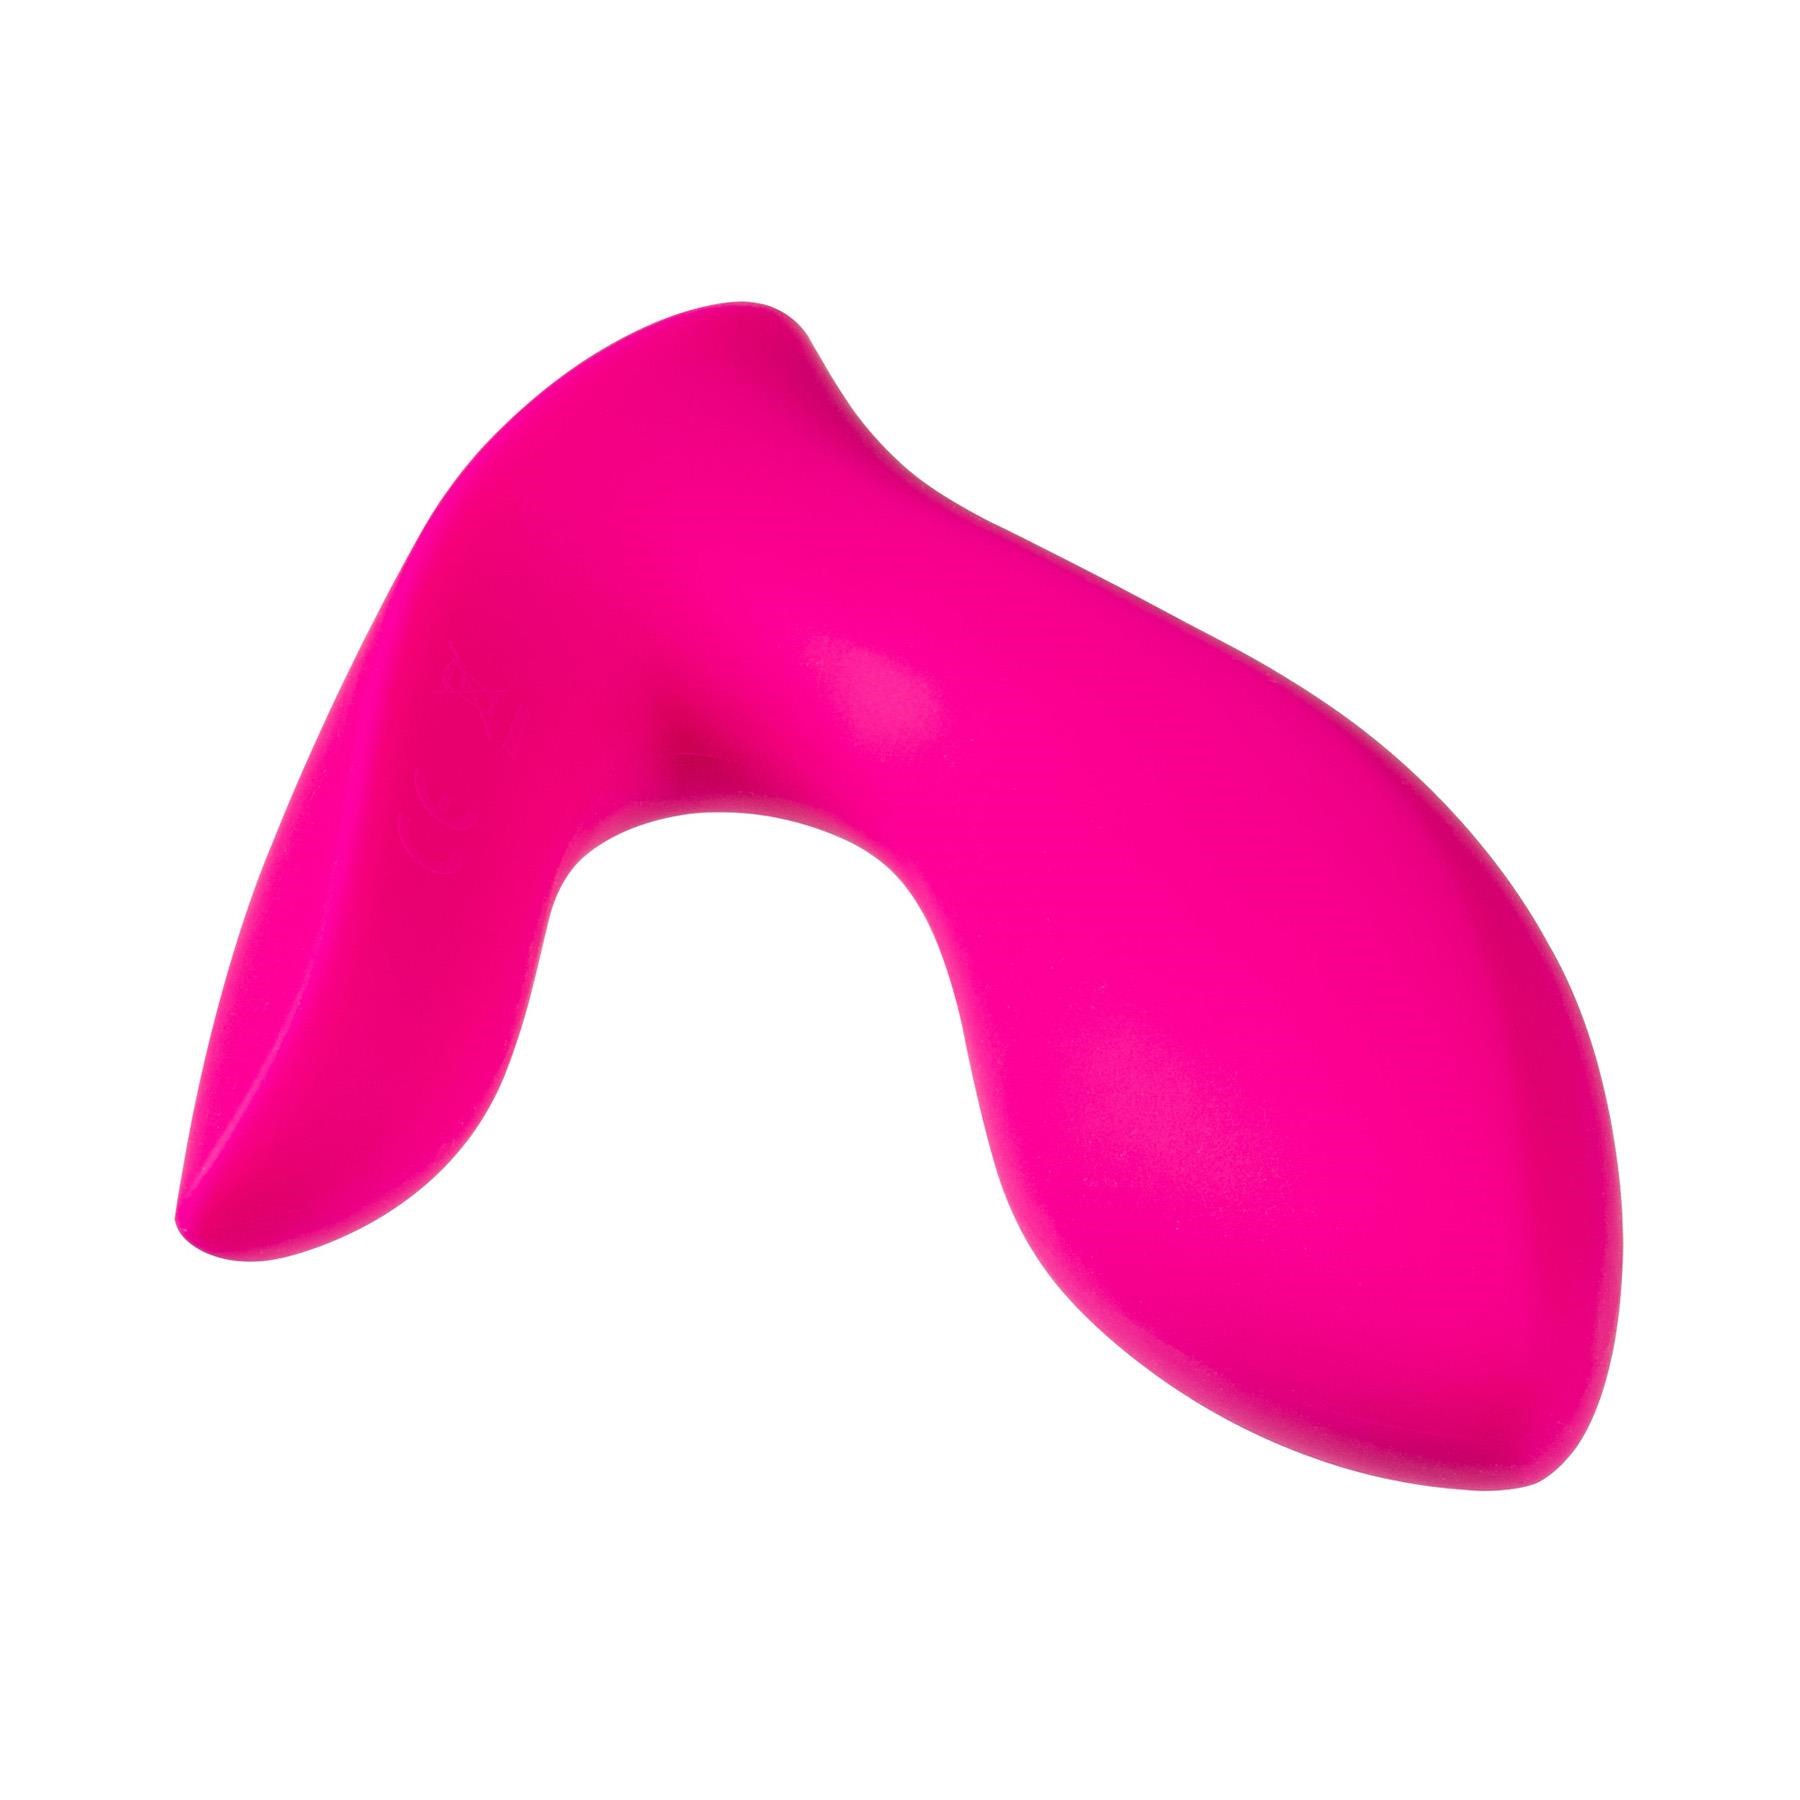 Lovense Bluetooth Flexer Come Hither Vibrator - Product Shot #2